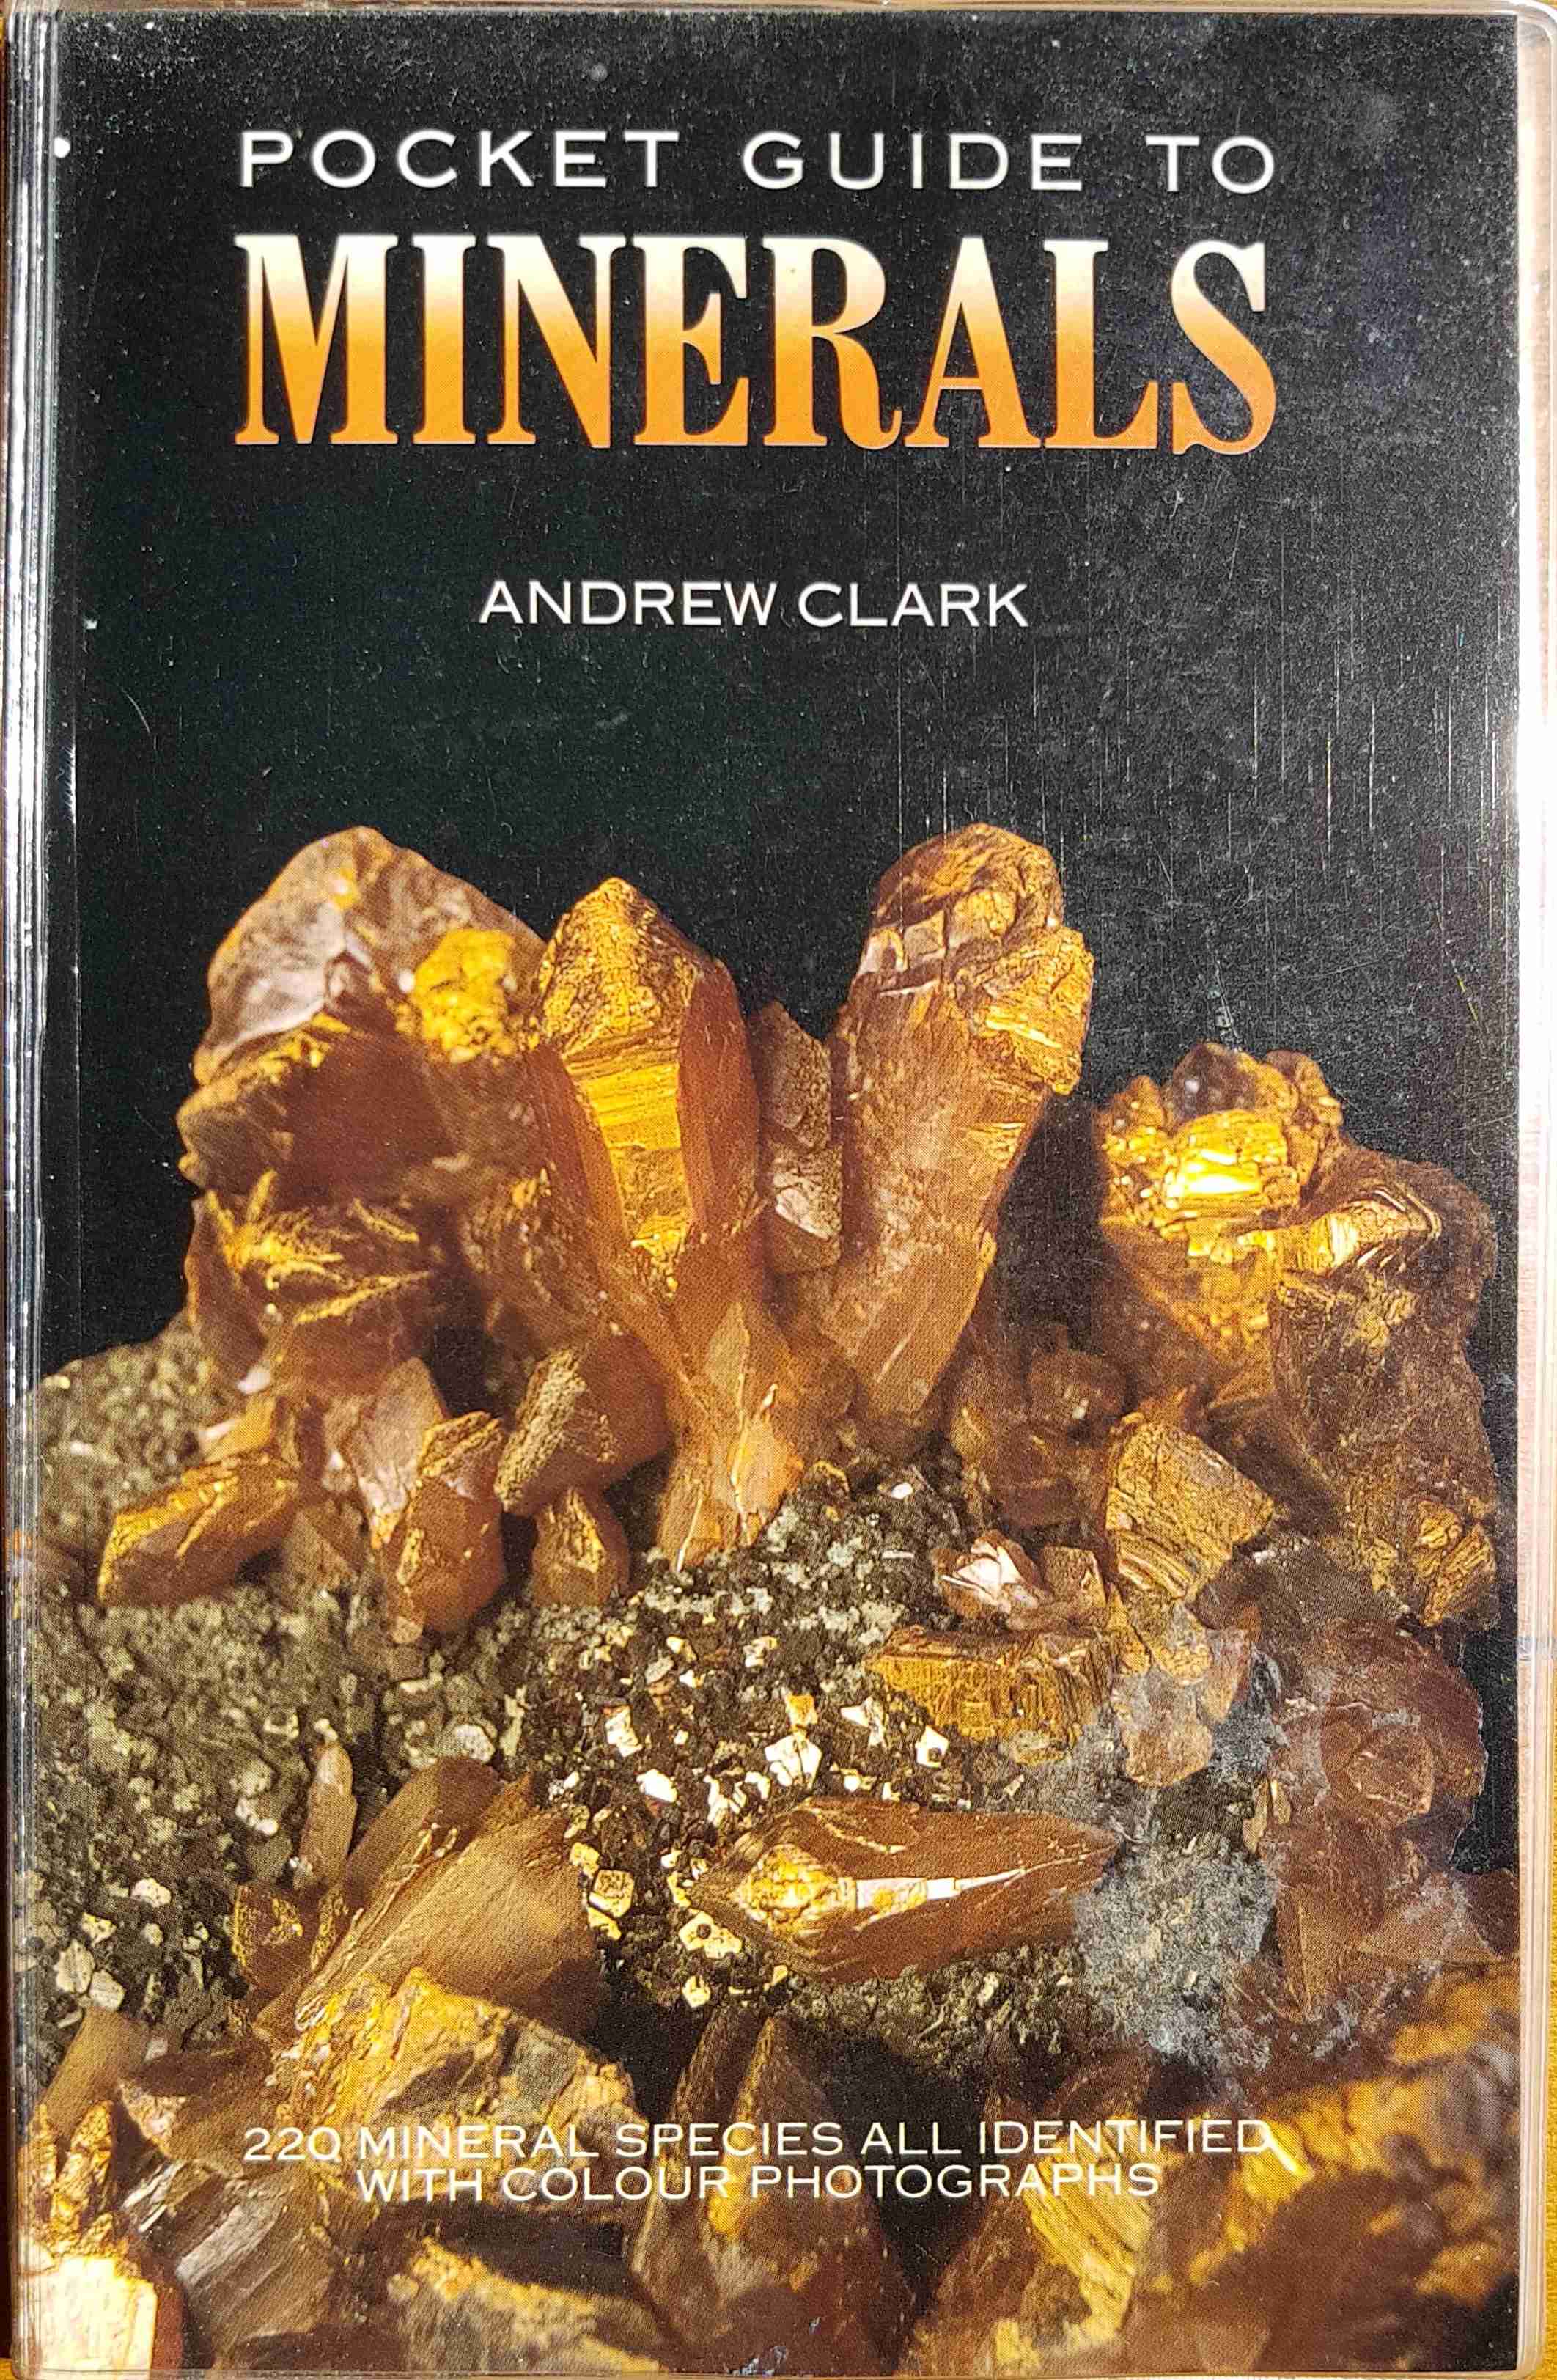 Picture of 0-600-56425-8 Pocket guide to minerals by artist Andrew Clark 